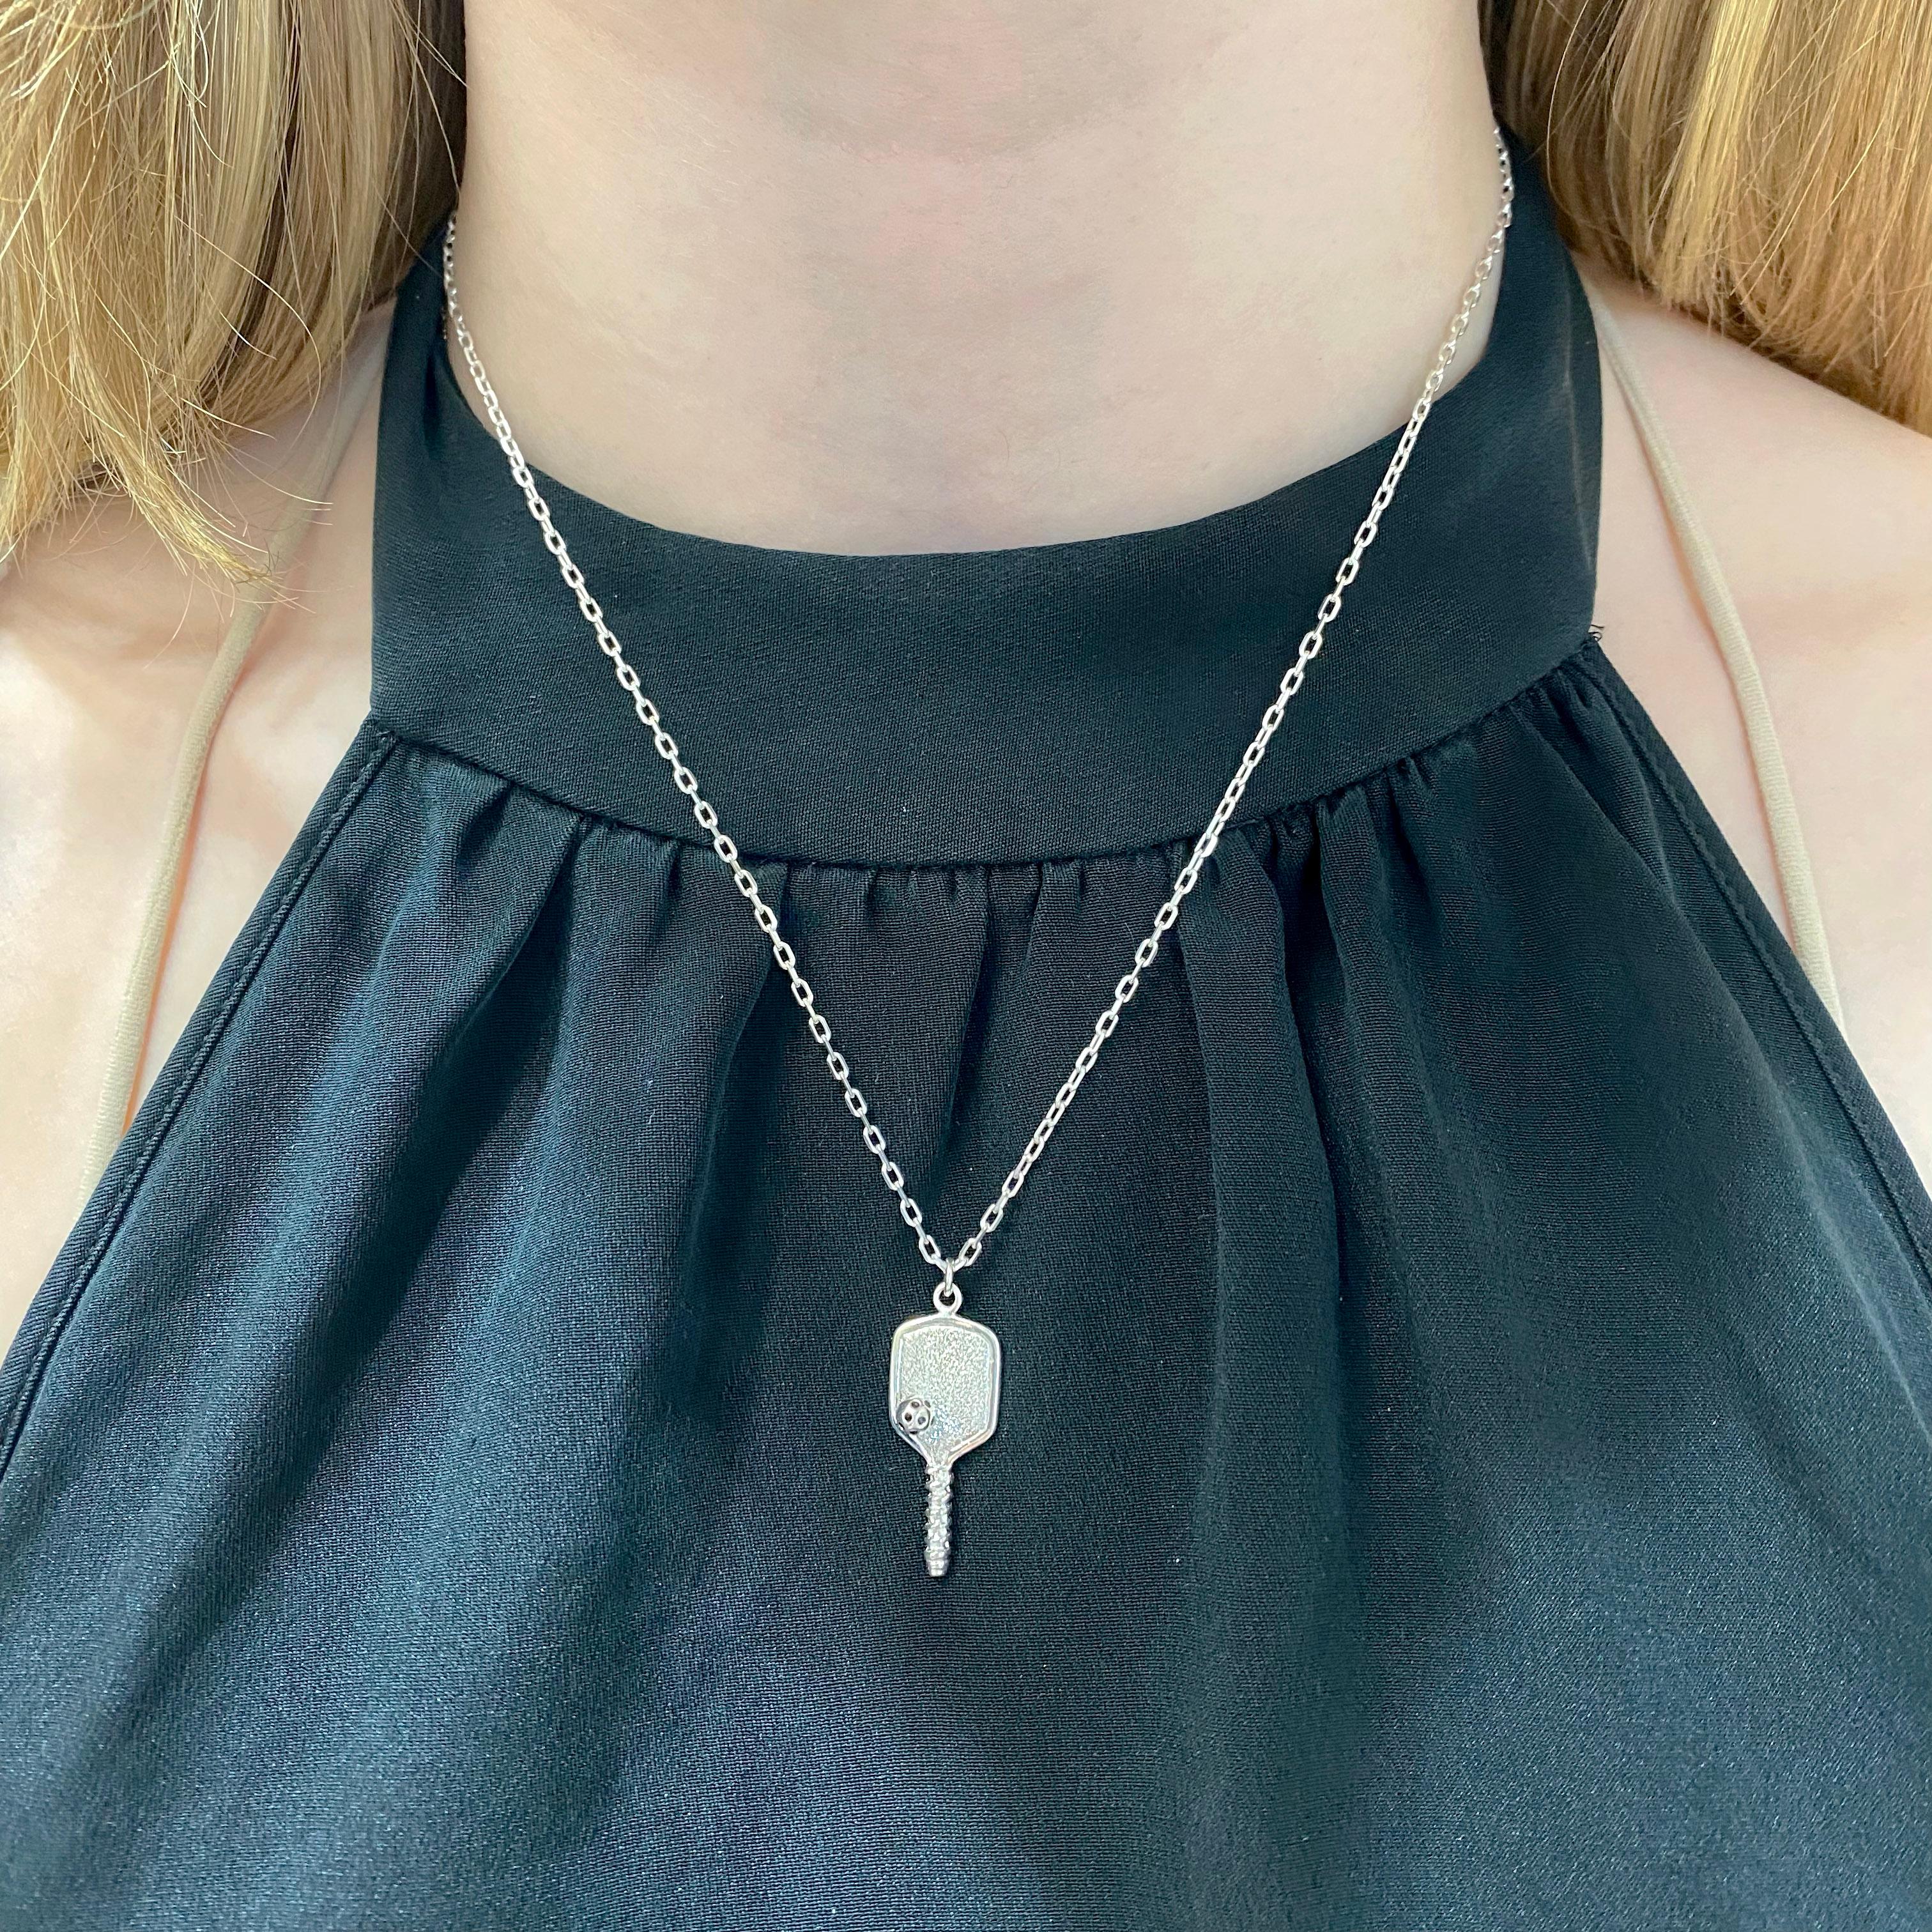 This Pickleball Paddle Necklace was handcrafted by our jewelers at Five Star Jewelry in Austin, Texas! We love pickleball and play almost everyday so we wanted to design a necklace that showed how much we love the sport! The necklace is the famous